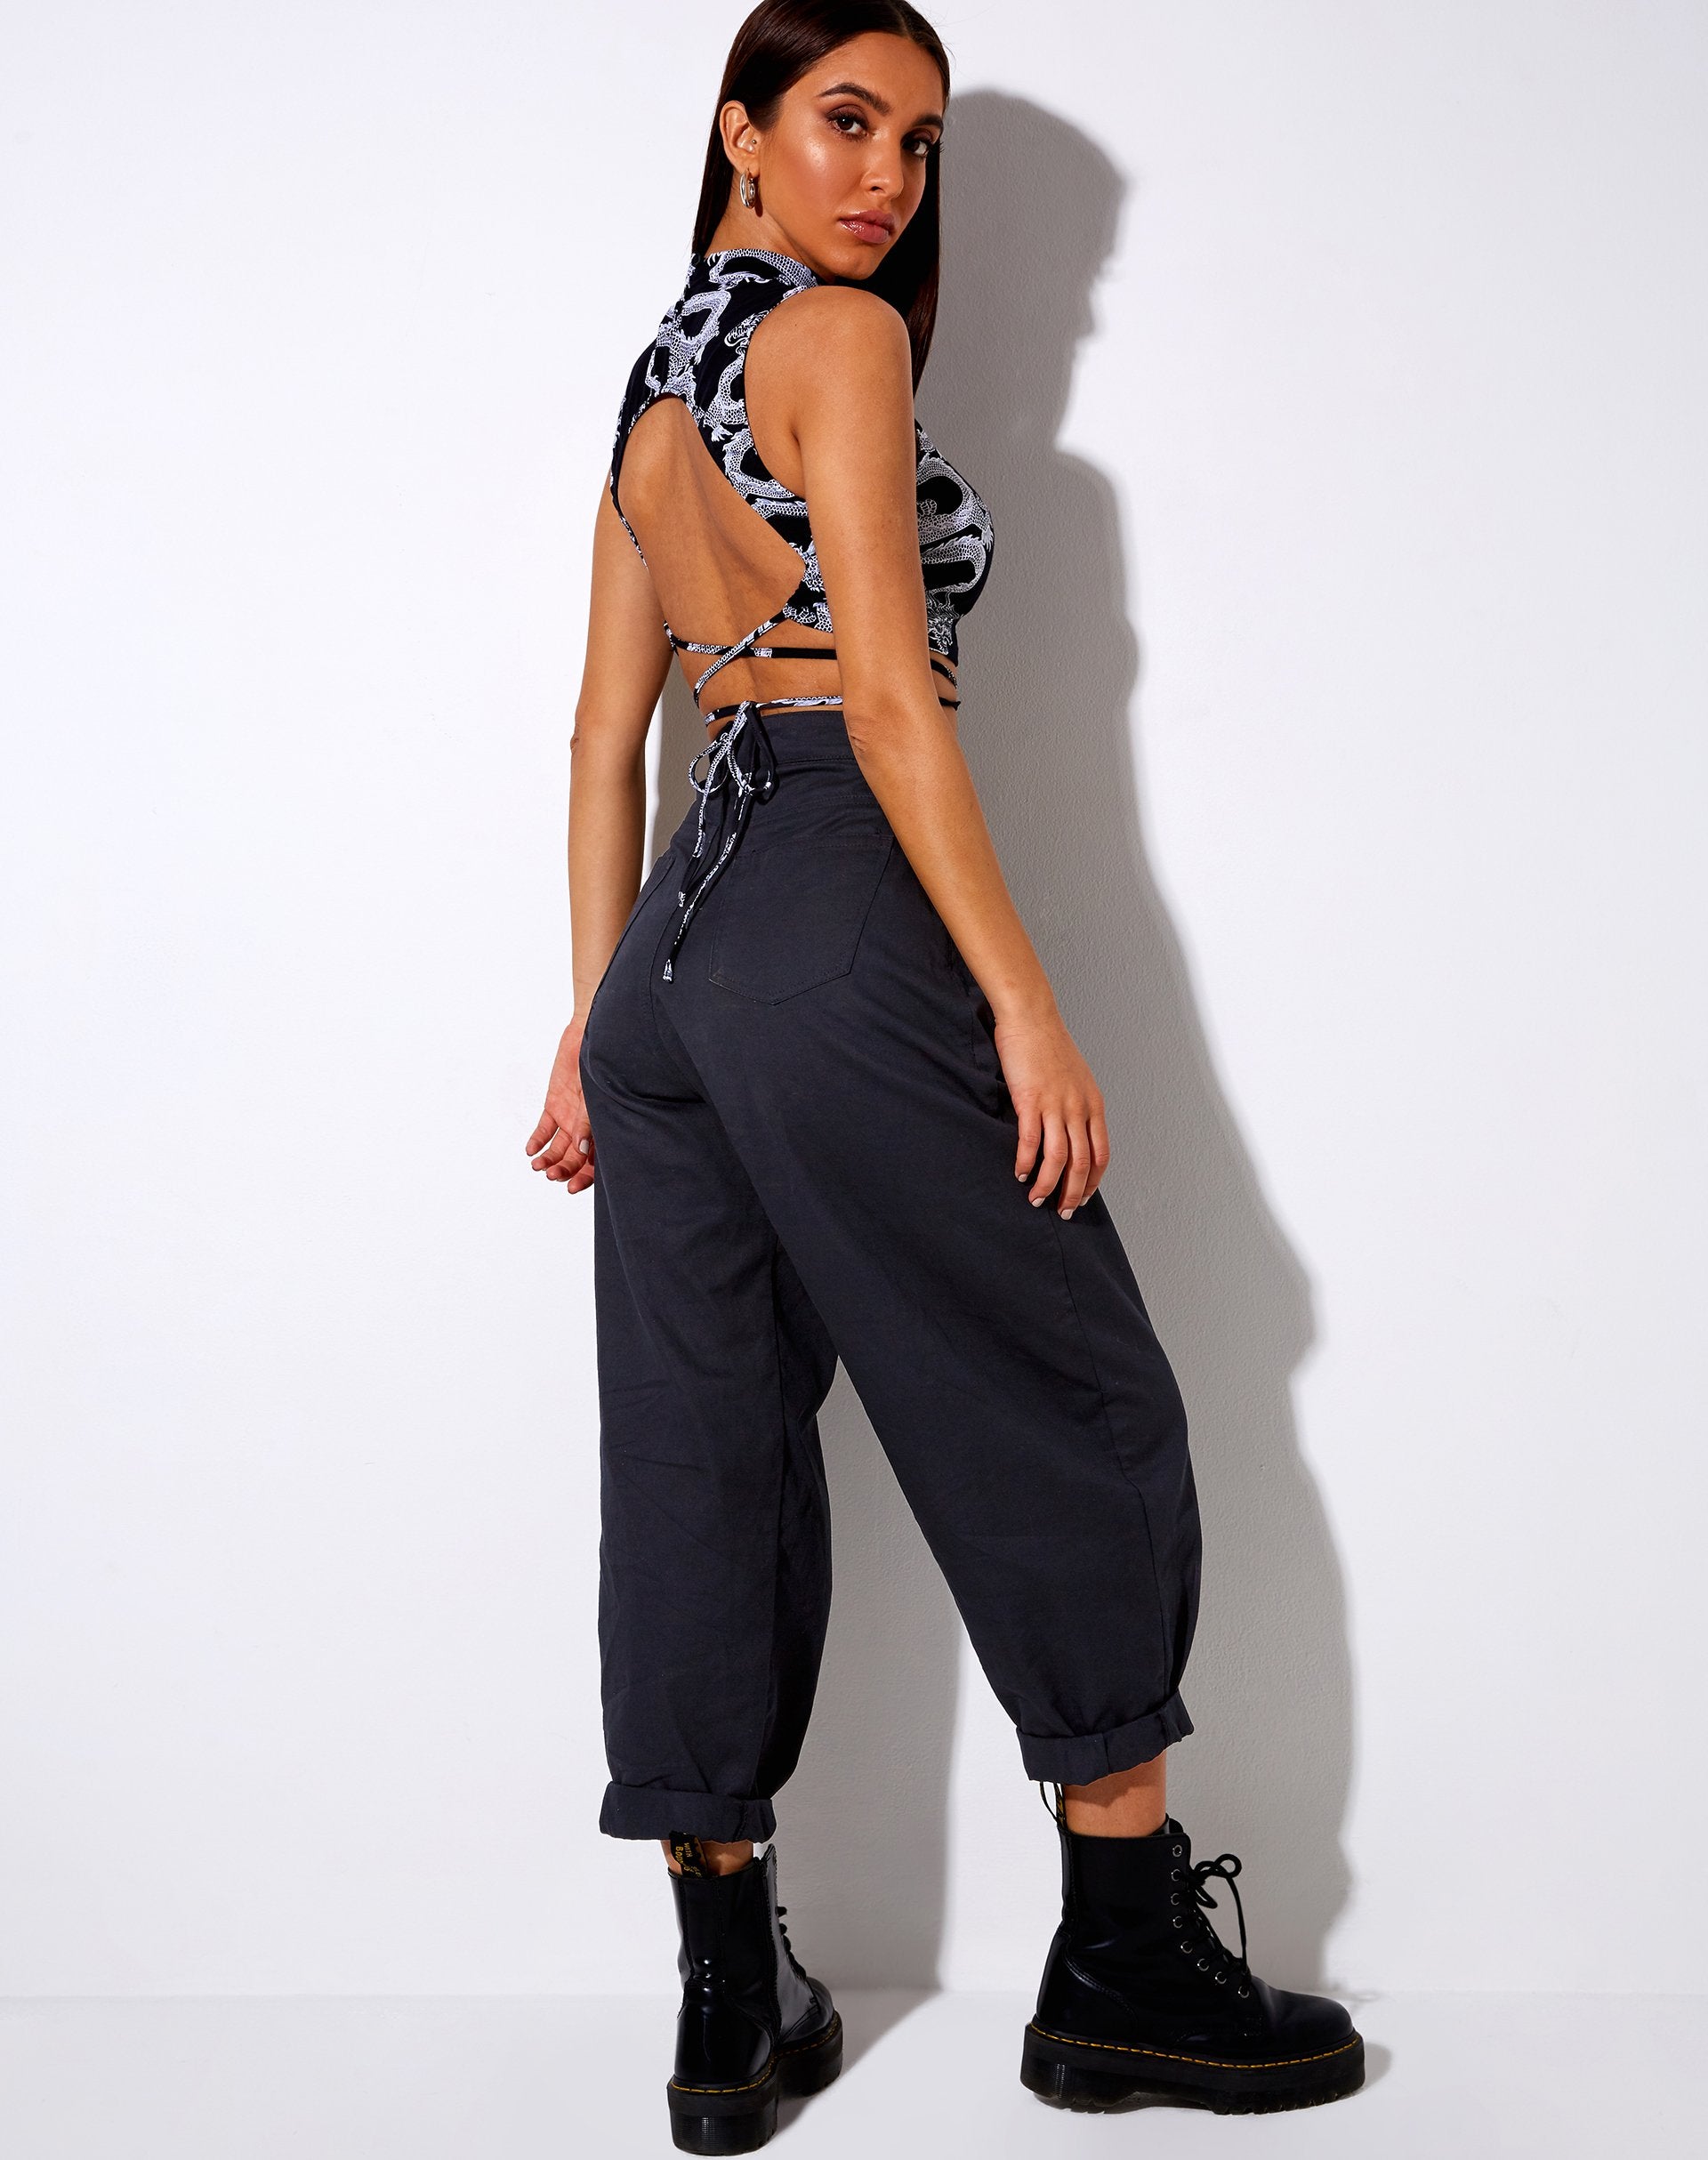 Image of Quera Crop Top in Dragon Rope Black Placement